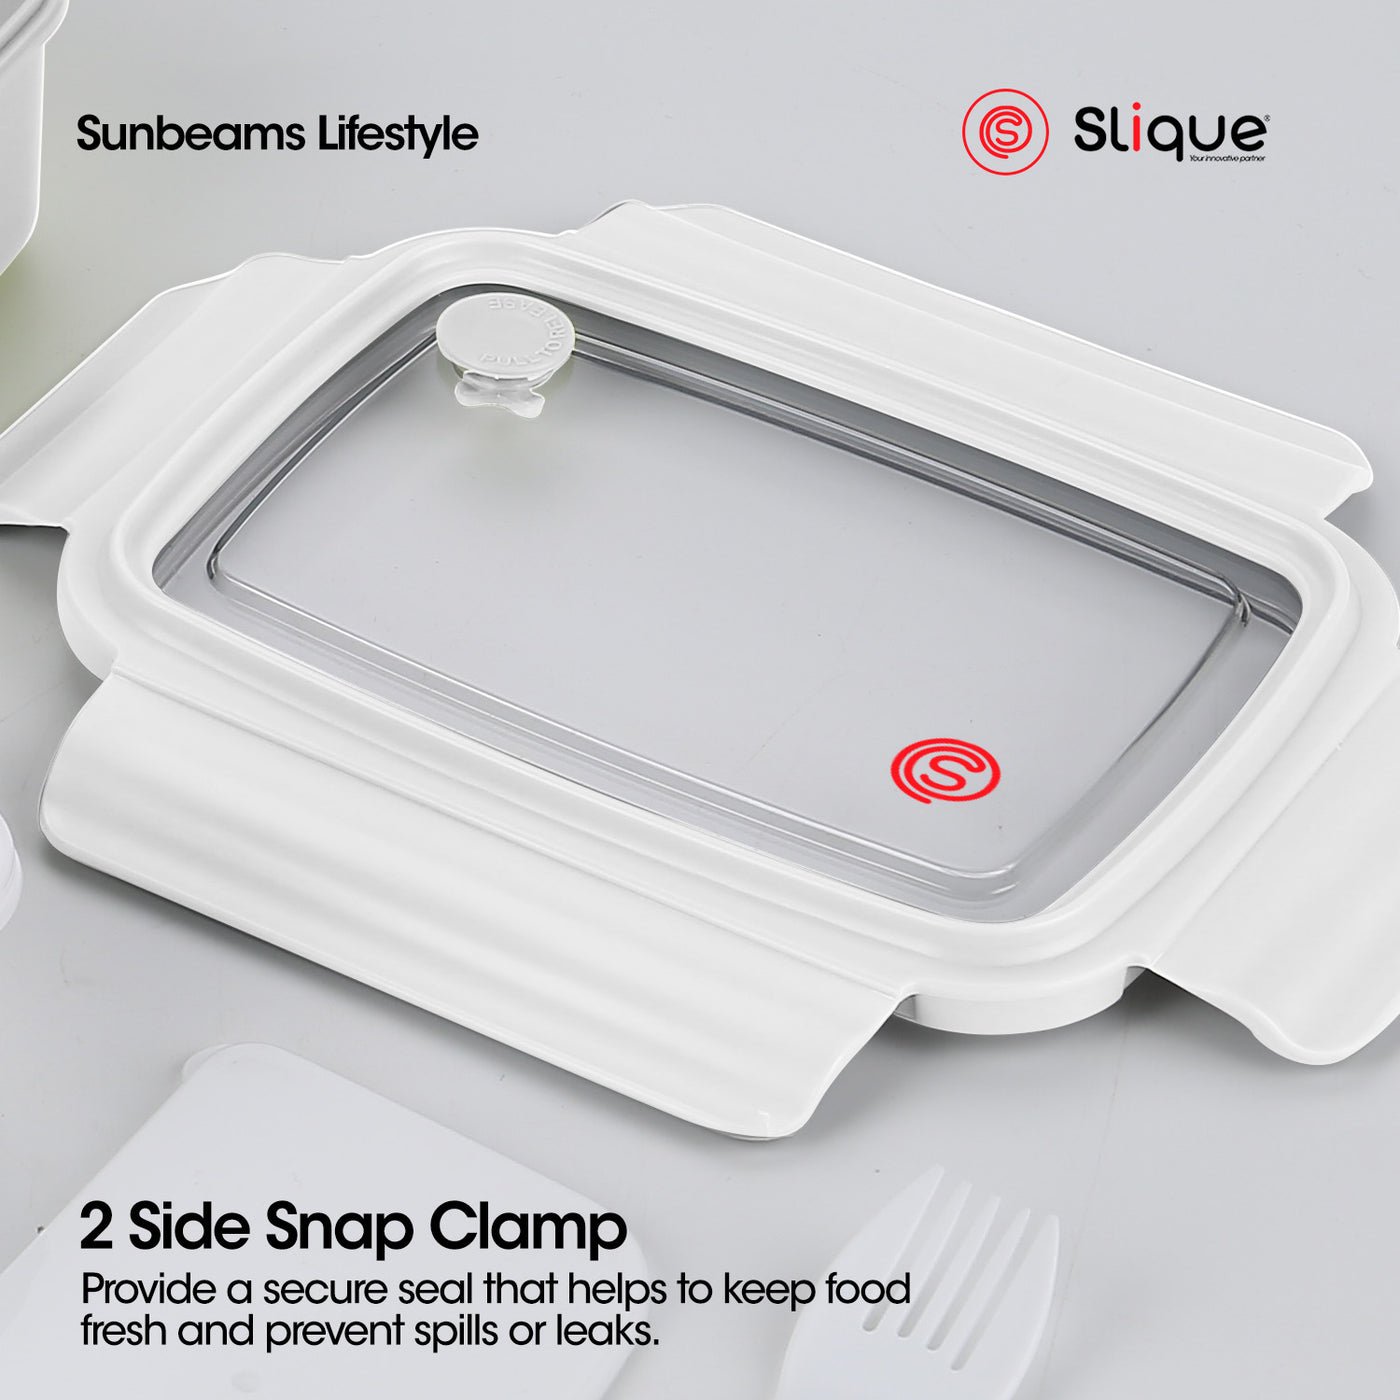 SLIQUE Lunch Box w/ Compartment Vent Spork 800ml | Stainless Steel Insulated | BPA Free Airtight Microwave Safe Amazing Gift Idea For Any Occasion!